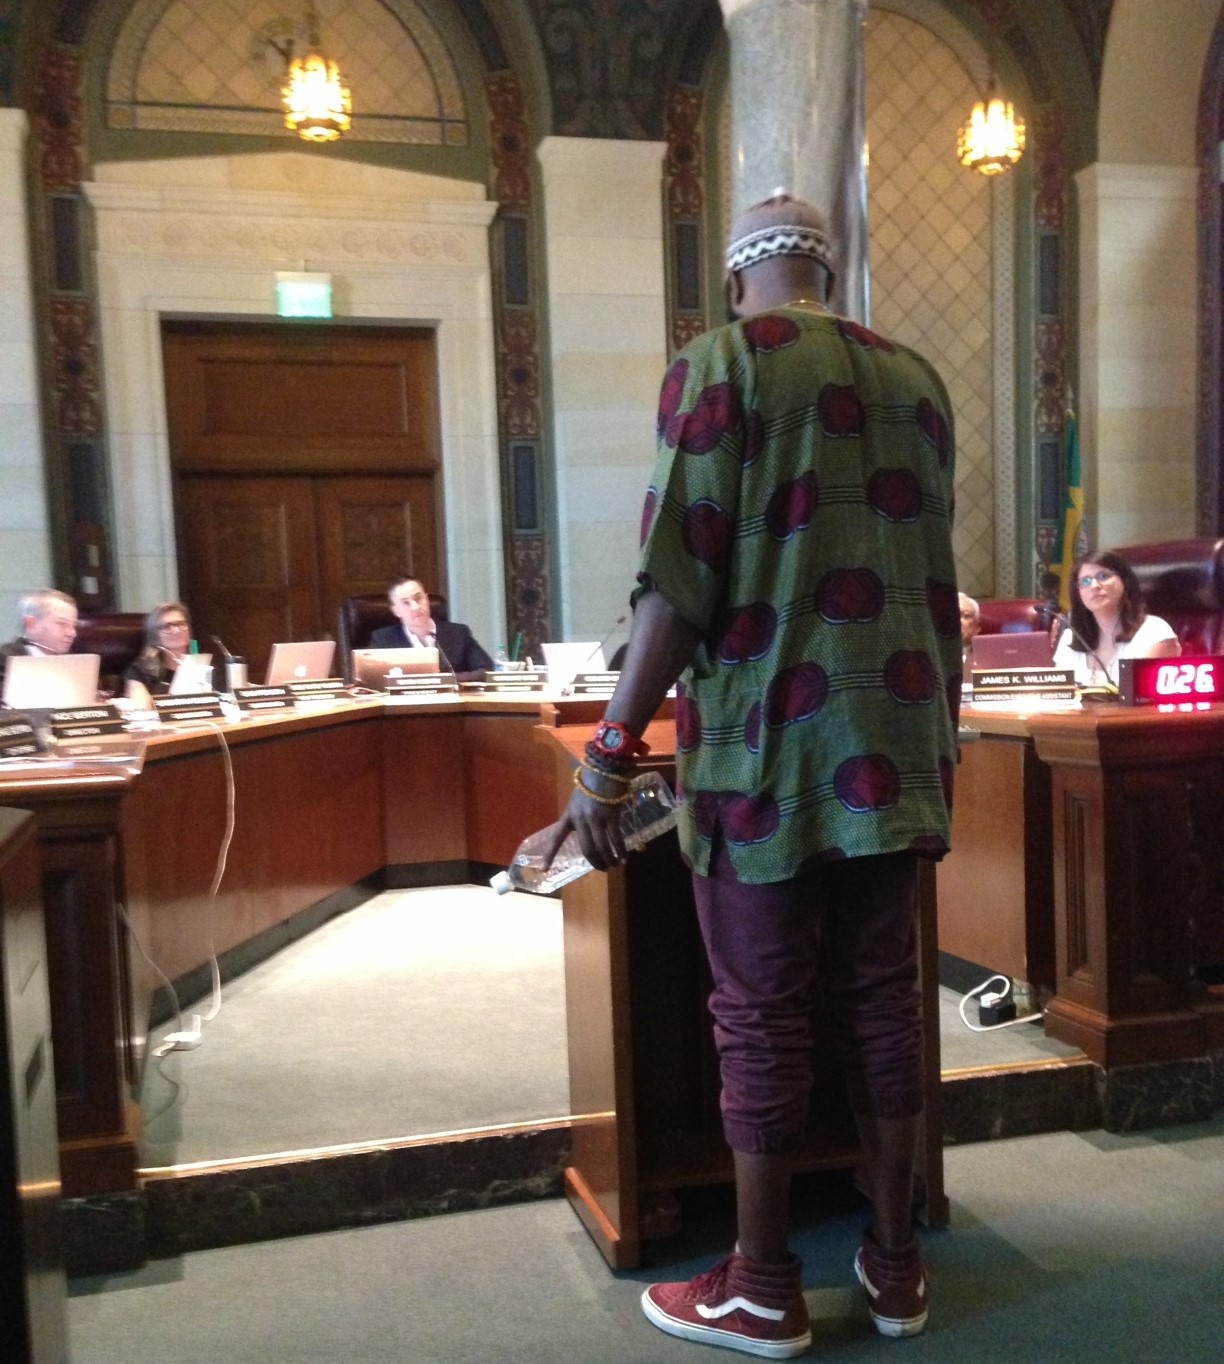 TRUST South L.A.'s Samuel Bankhead giving public comment in favor of Central Avenue bike lanes at yesterday's Planning Commission hearing. Photo: Joe Linton/Streetsblog L.A.